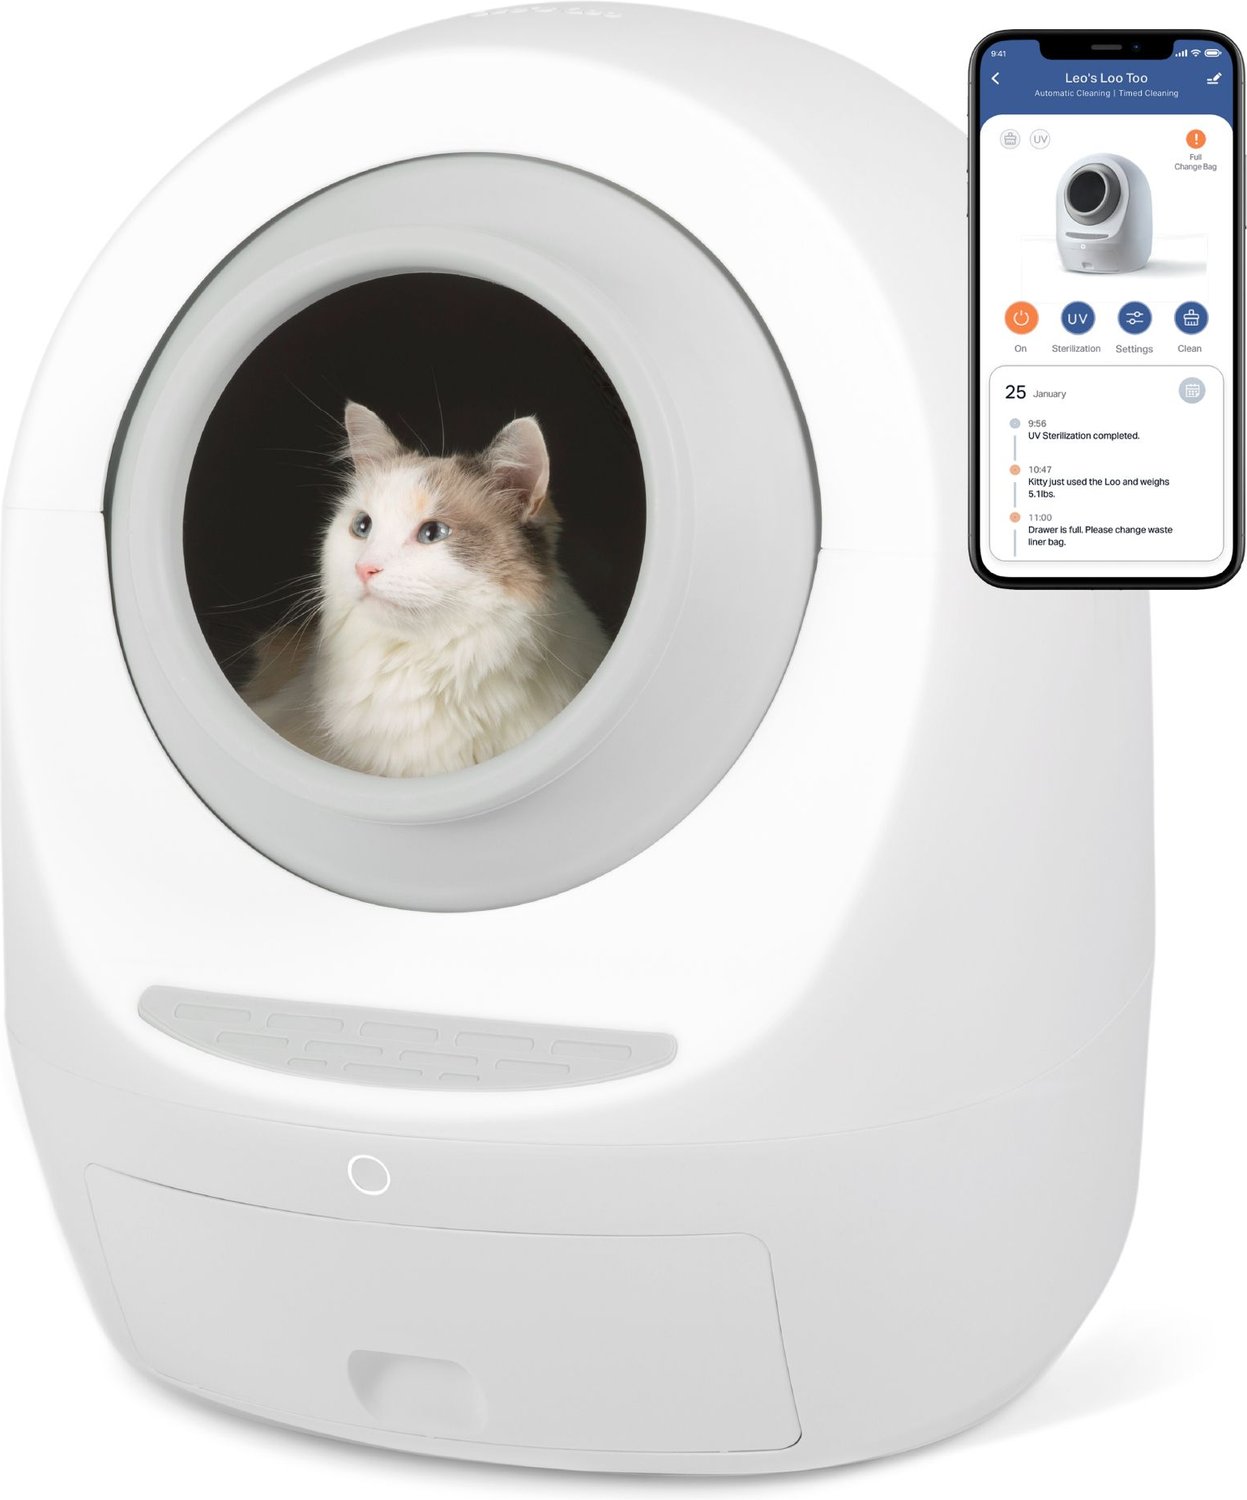 Smarty Pear Leo's Loo Too Wifi Enabled Cat Litter Box